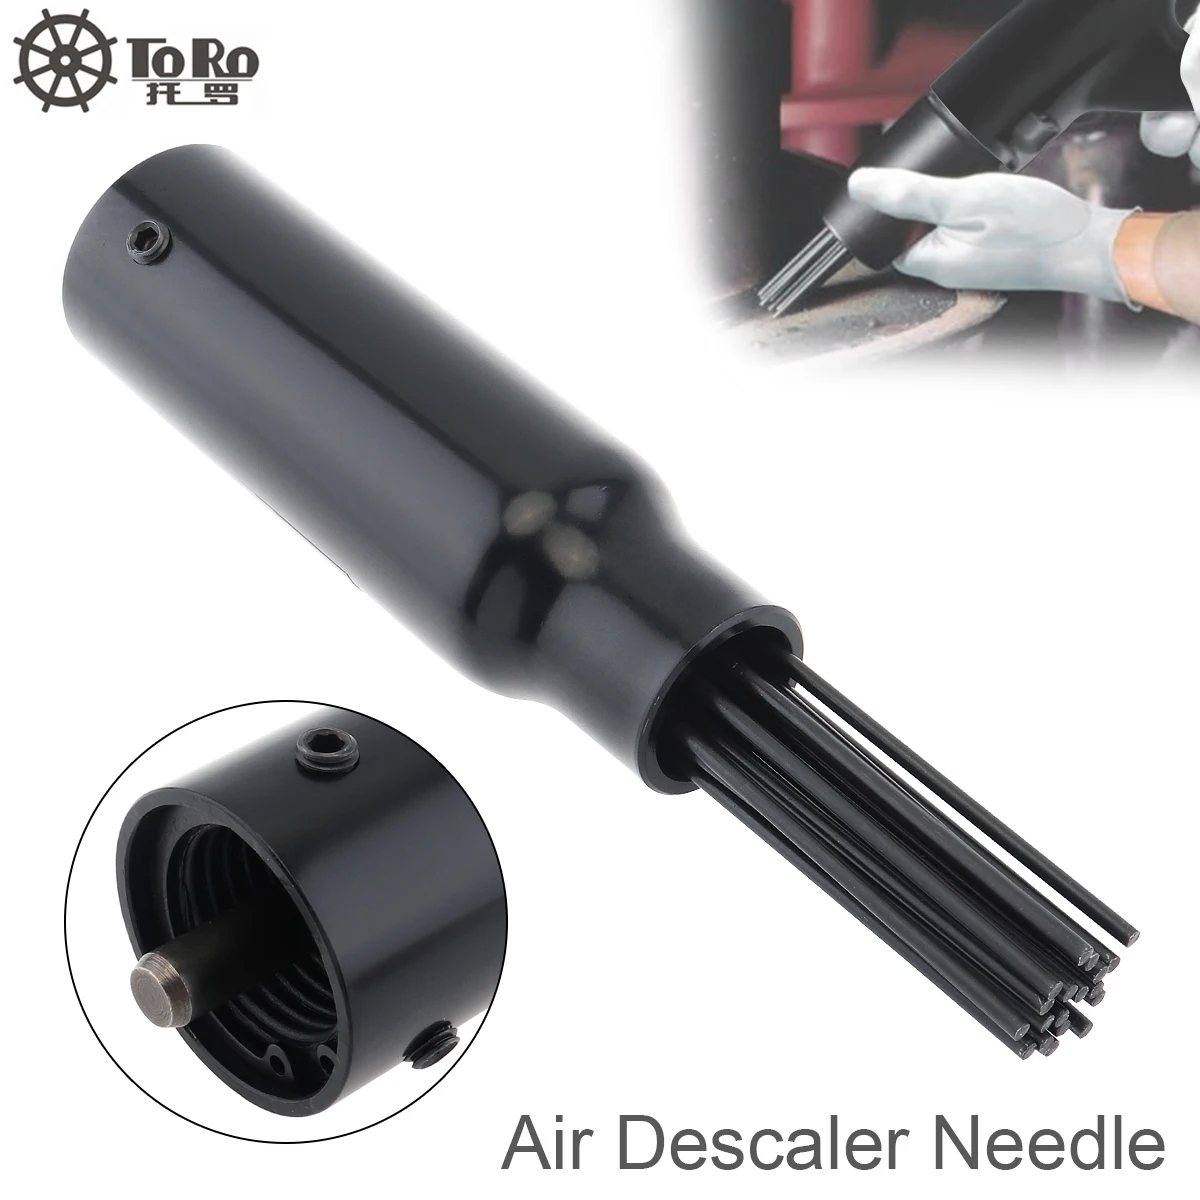 

TR-9190 Black Pneumatic Needle Scaler Bundle Deruster Head with 19 Needle for Rust and Welding Slag Light Burr Removal